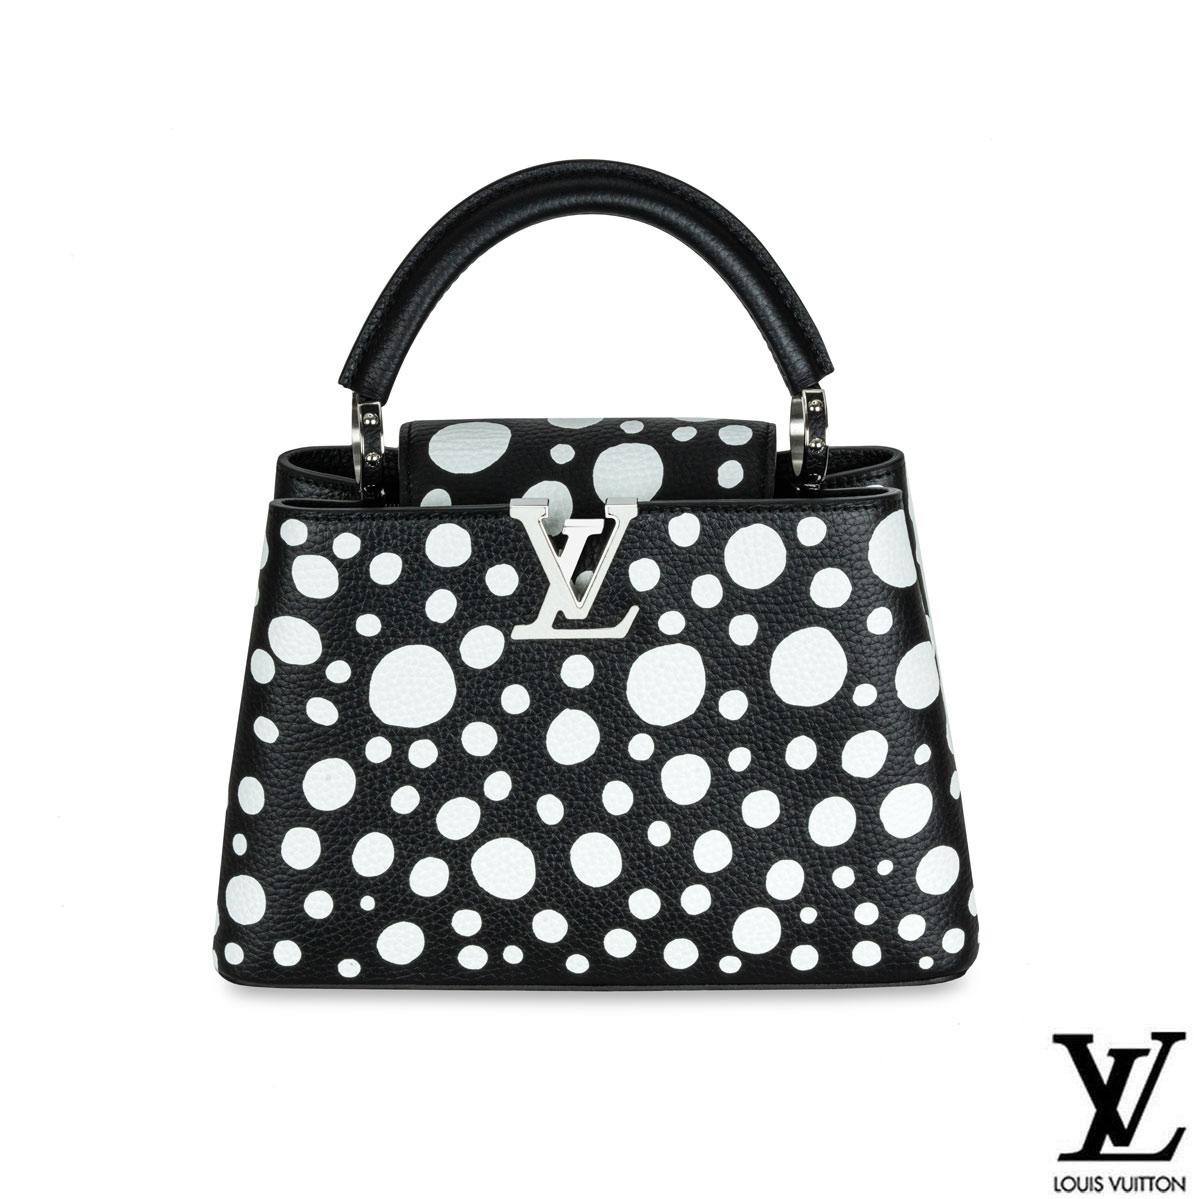 Introducing the mesmerising fusion of luxury and avant-garde artistry - the Louis Vuitton Capucine MM bag, a stunning collaboration with the iconic Japanese artist Yayoi Kusama. This limited-edition masterpiece seamlessly marries Louis Vuitton's